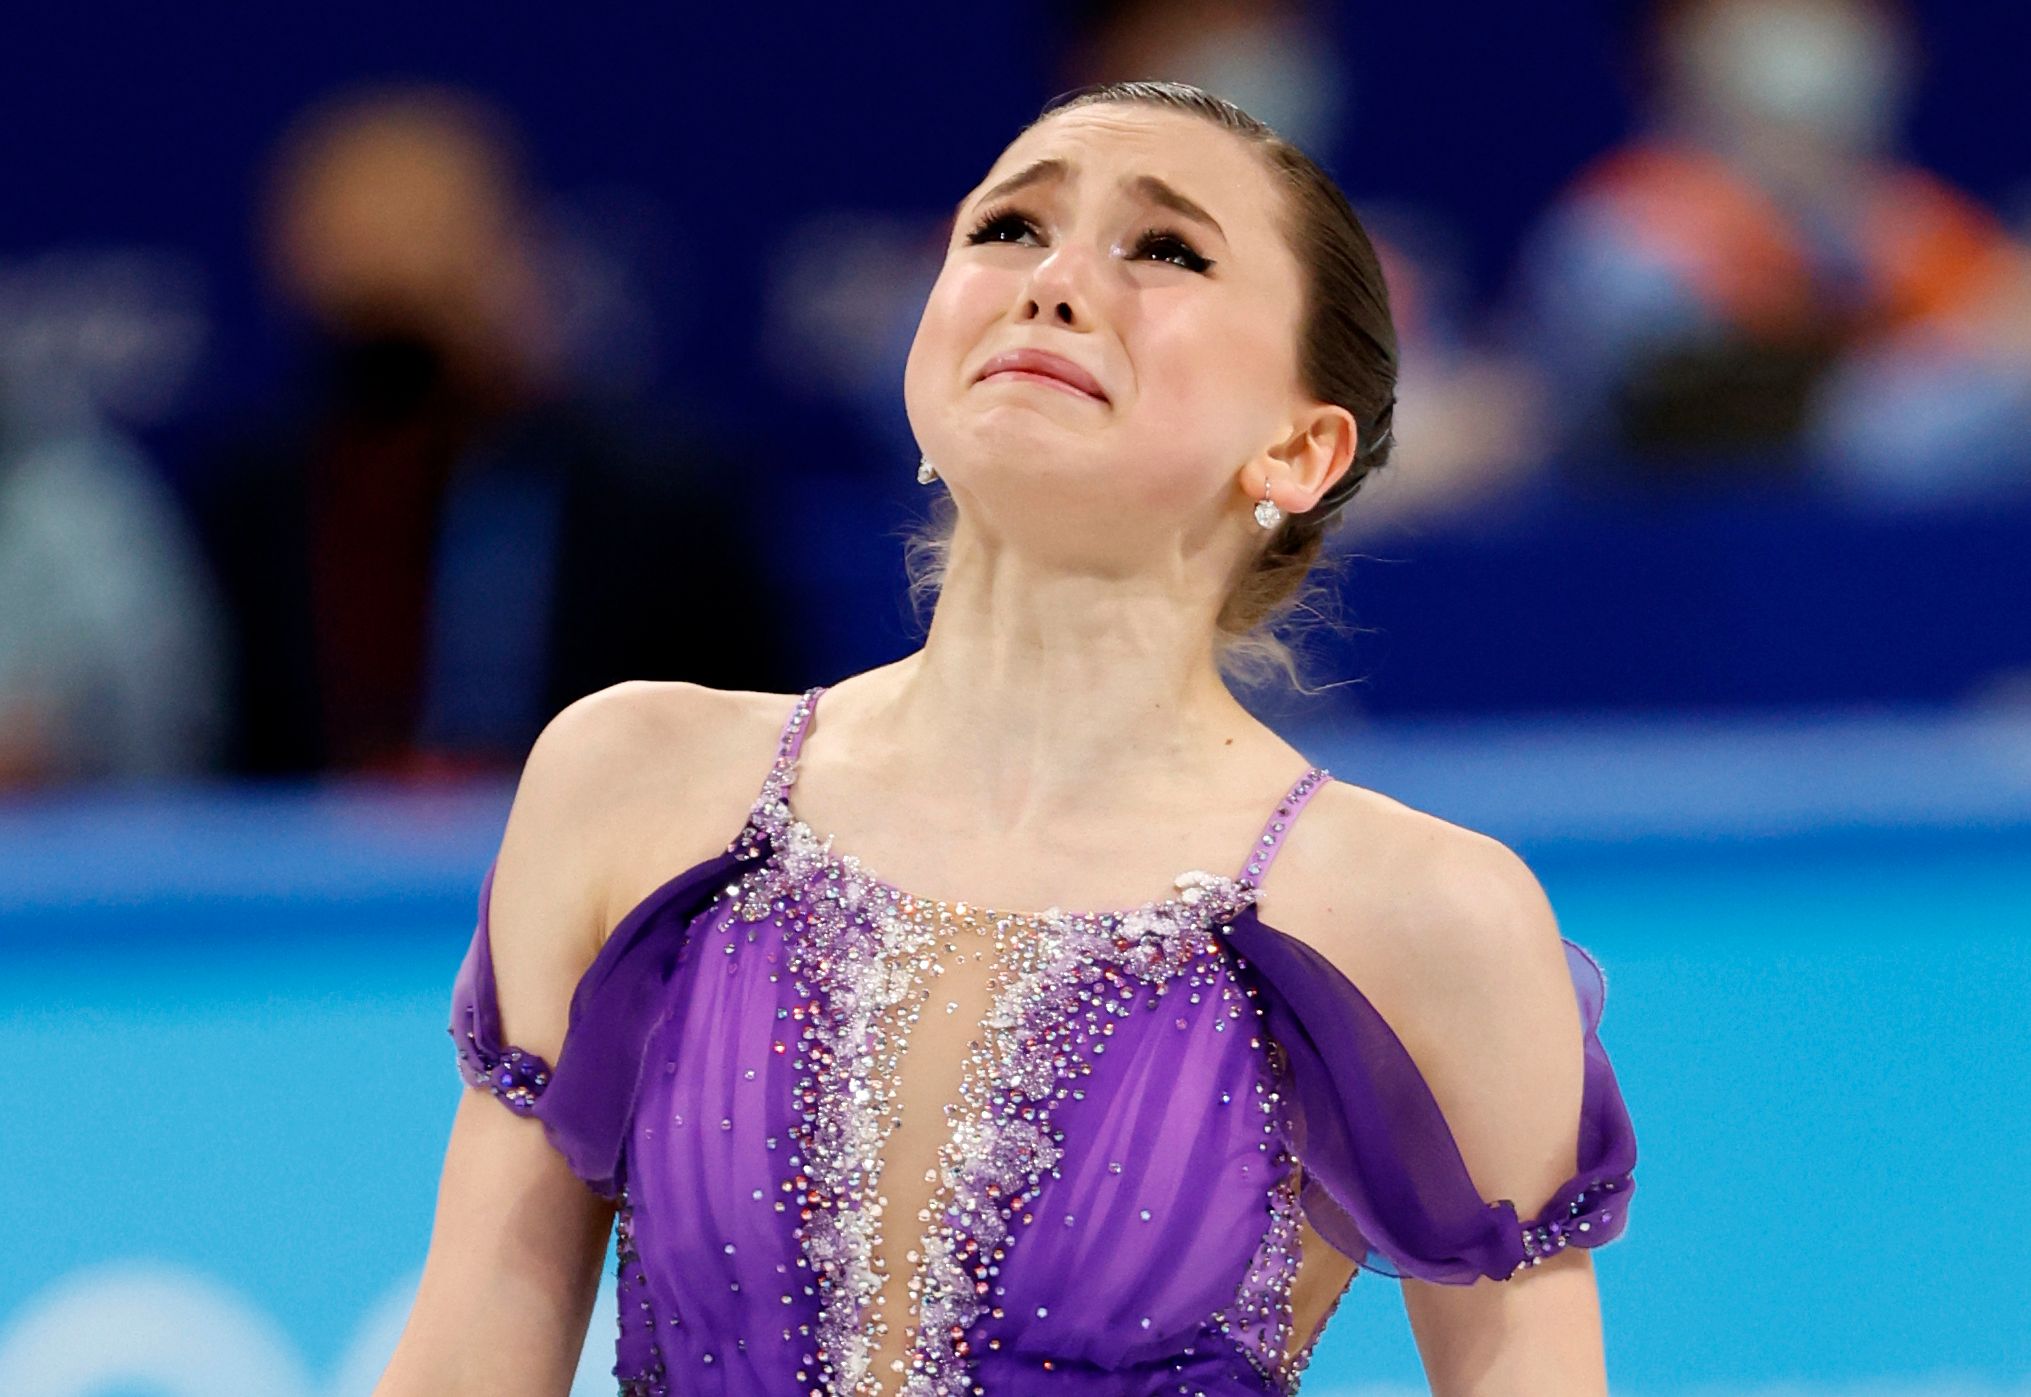 Eileen Gu renounced her US citizenship to compete for China in the  Olympics. As an Asian-American, I have some thoughts